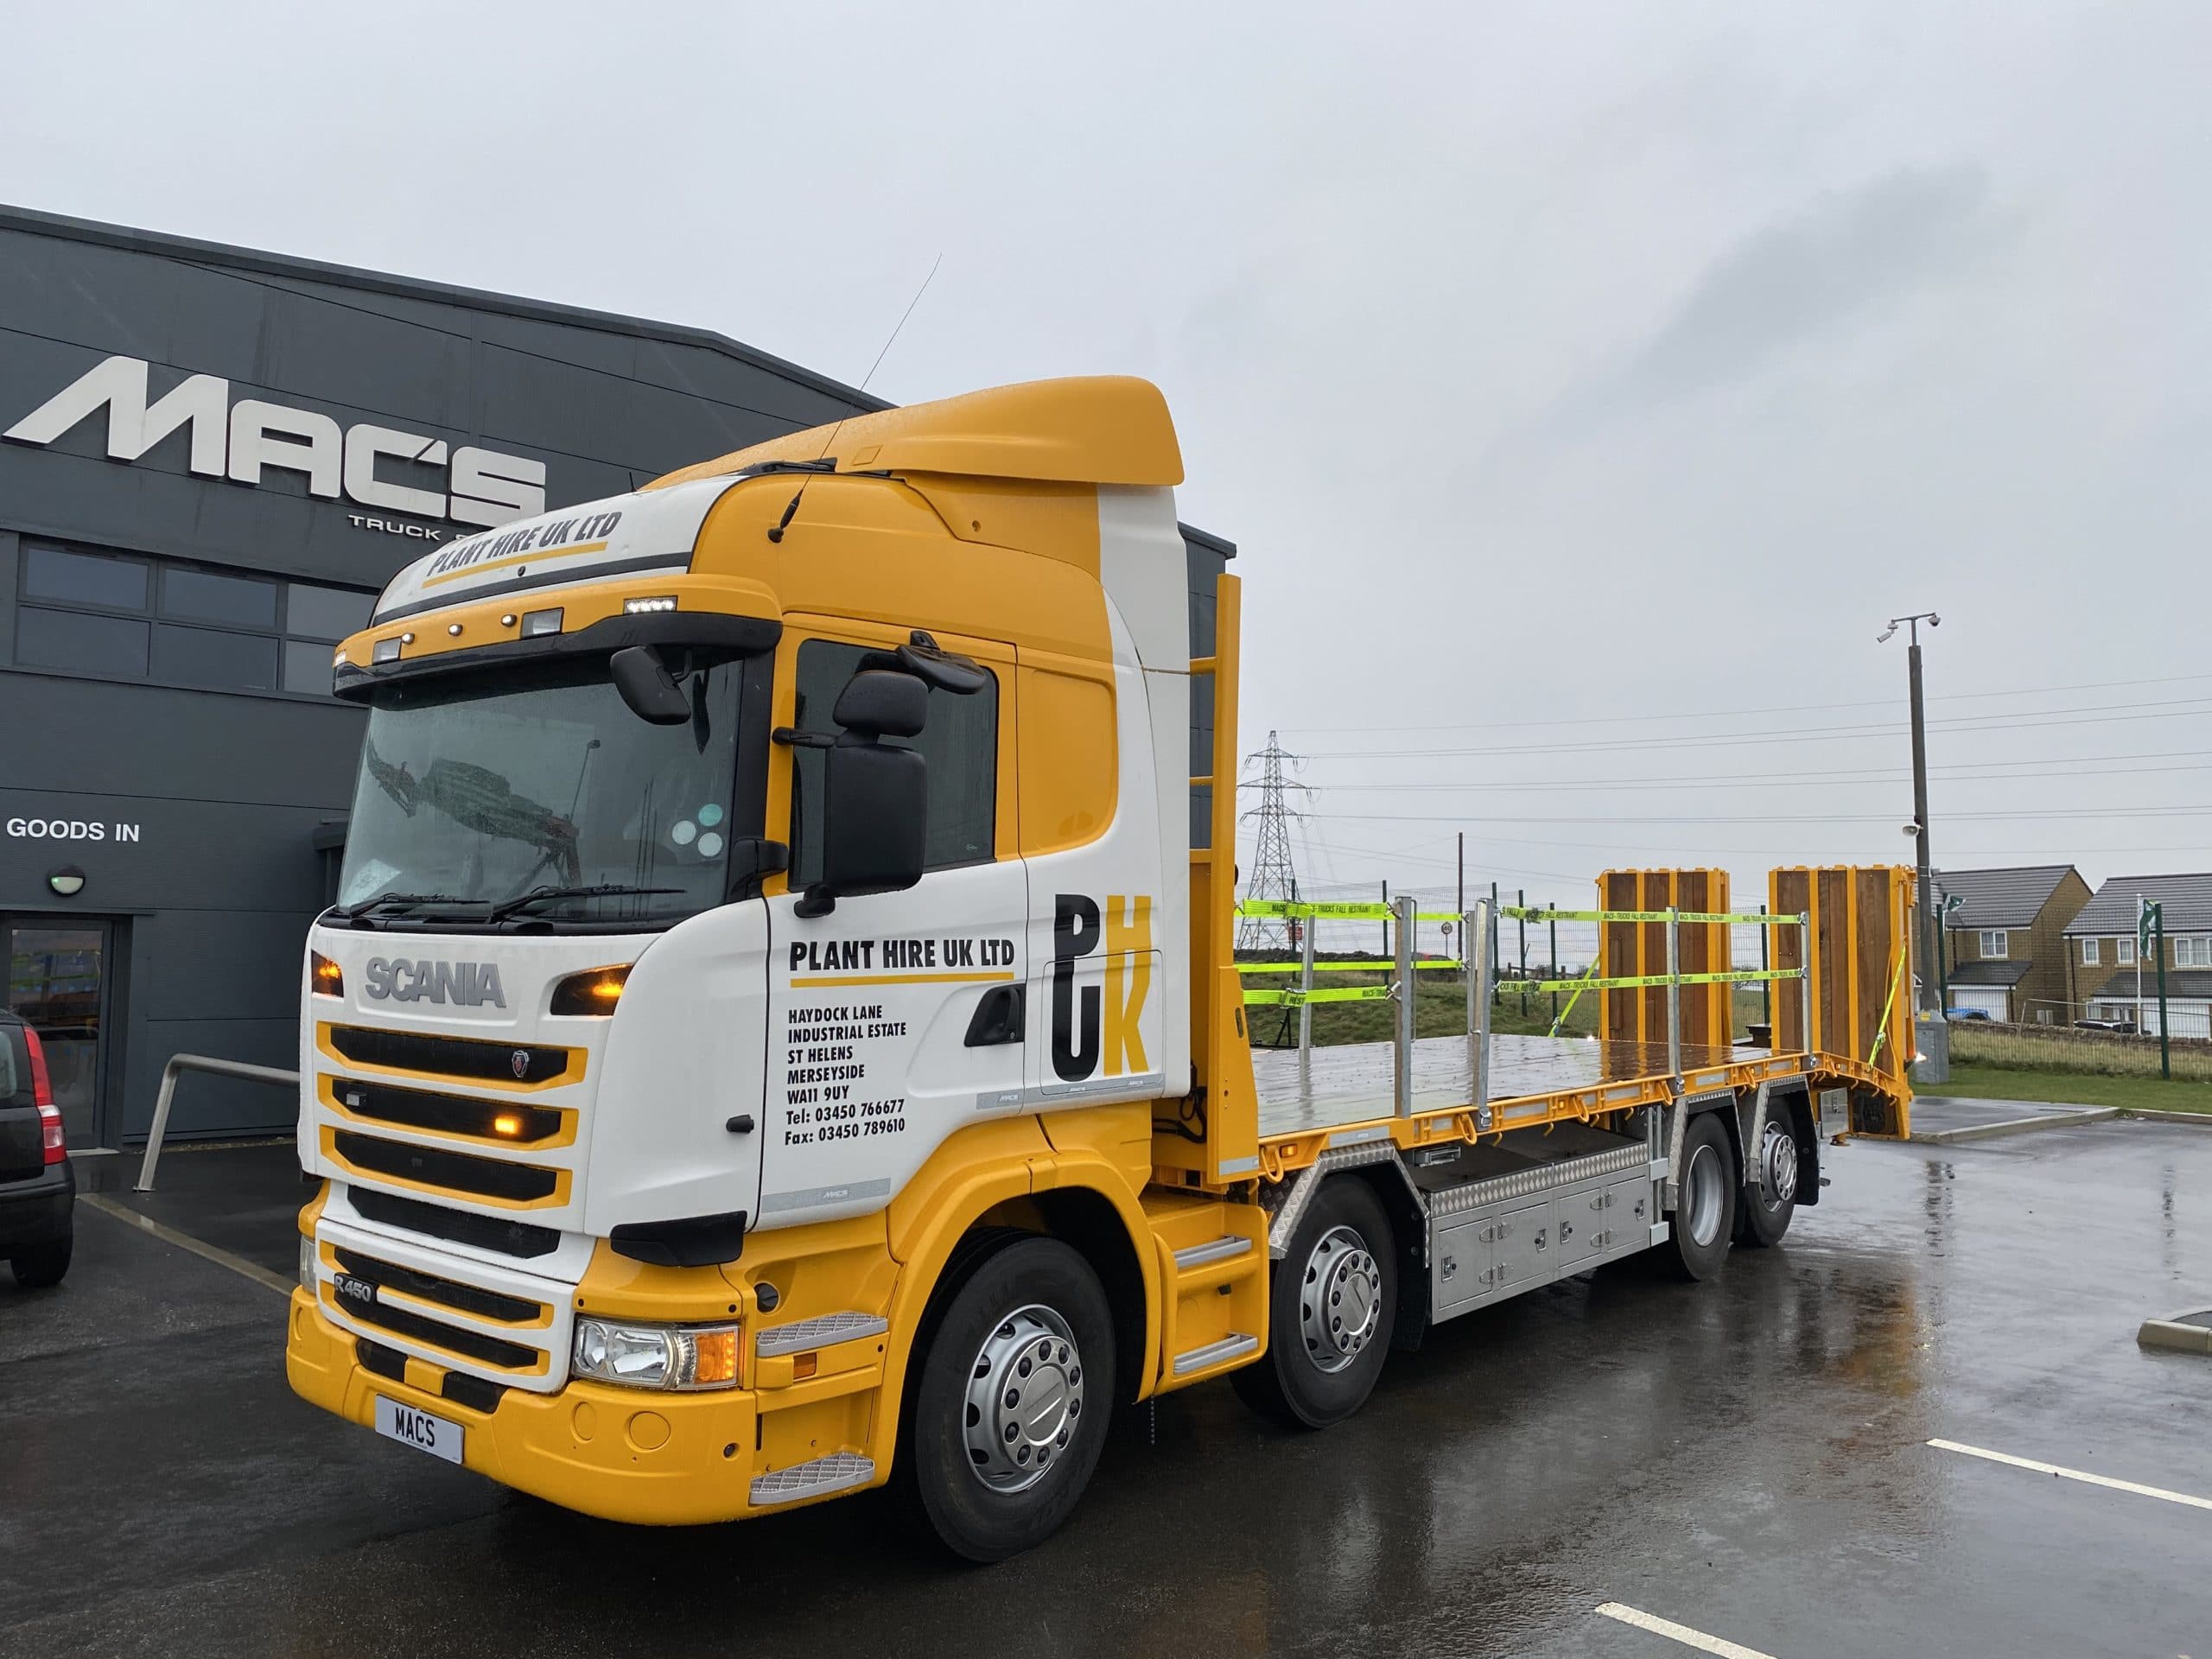 Over a Decade of Supplying Trucks to Plant Hire UK